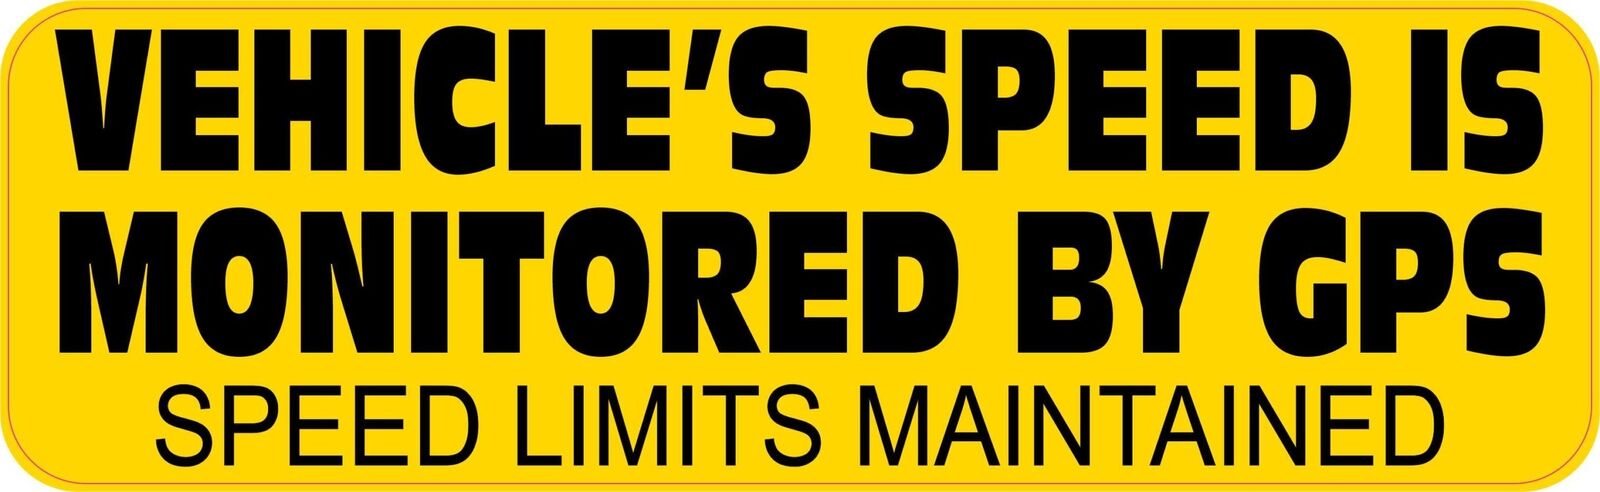 10in x 3in Yellow Speed Monitored by GPS Vinyl Sticker Car Vehicle Bumper Decal